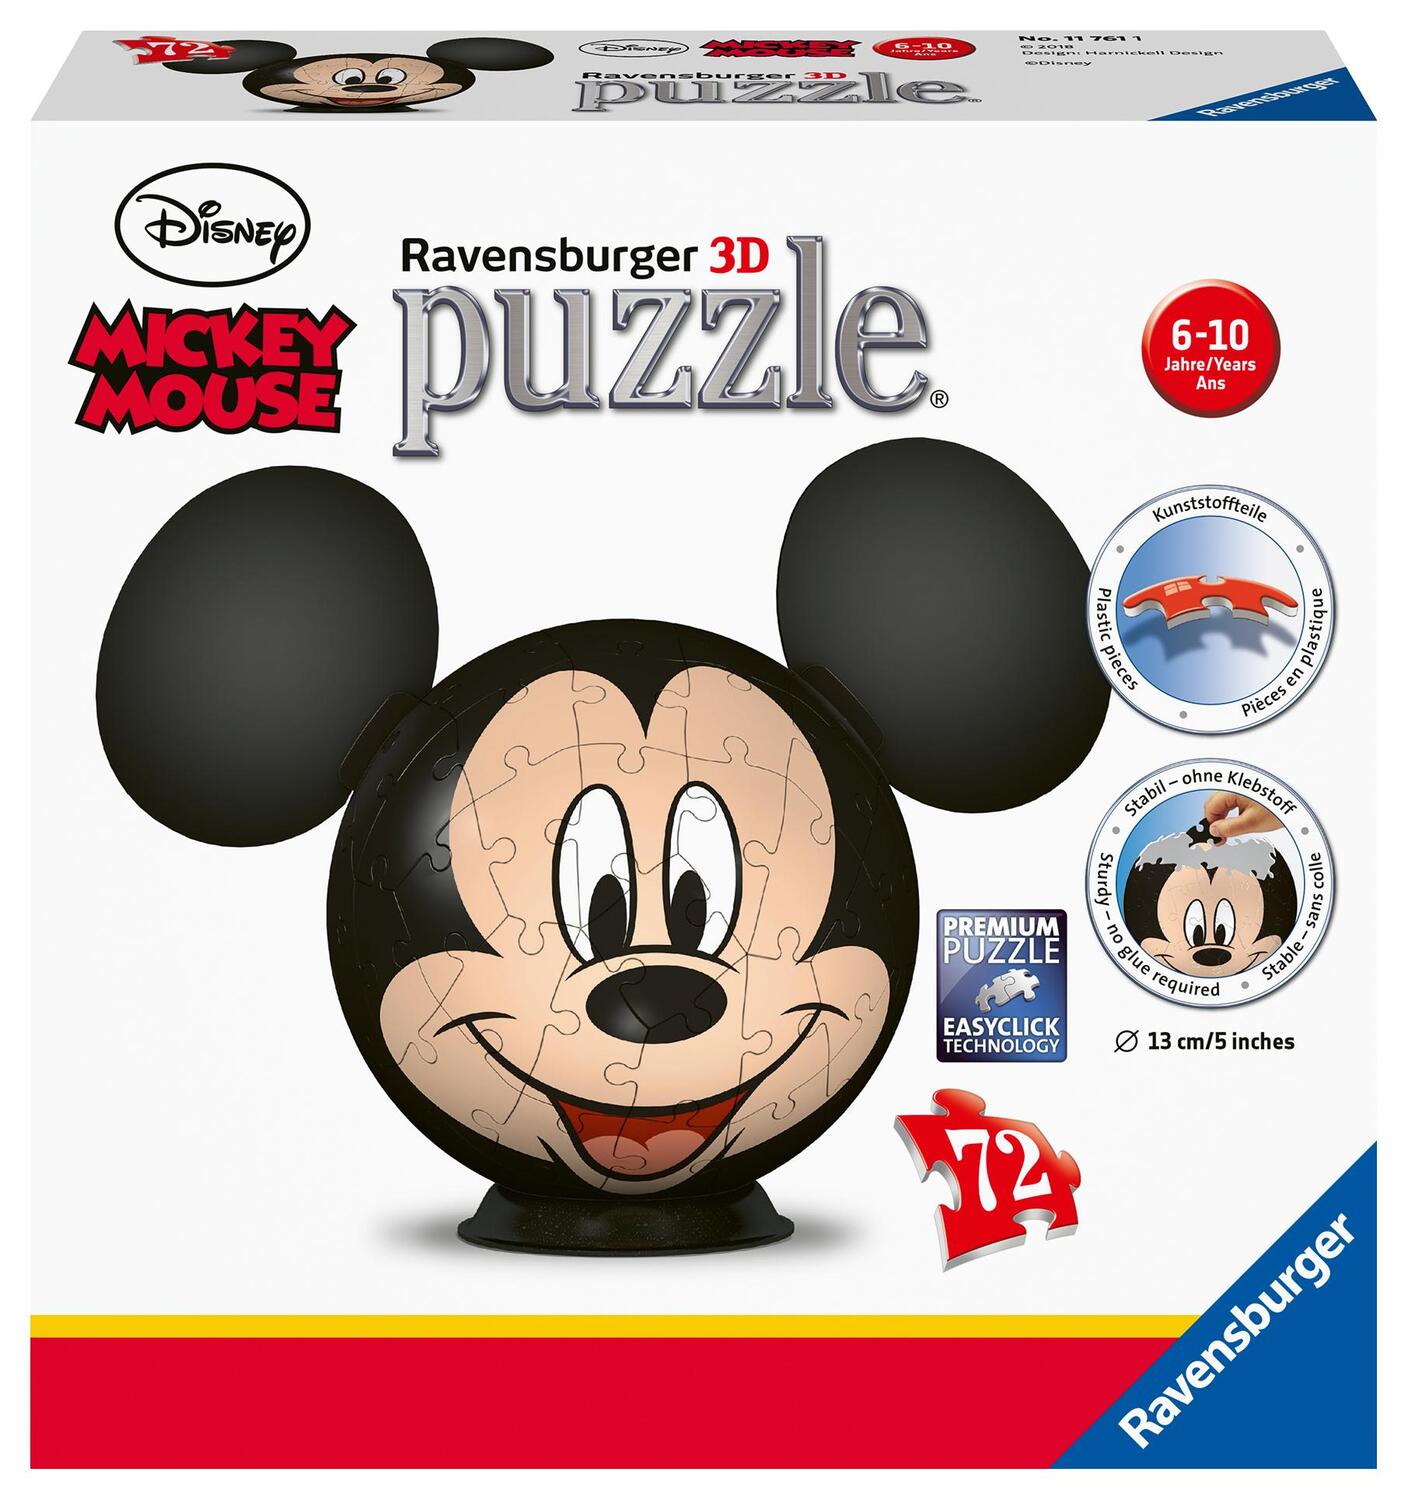 Cover: 4005556117611 | Ravensburger 3D Puzzle 11761 - Puzzle-Ball Mickey Mouse - 72 Teile...